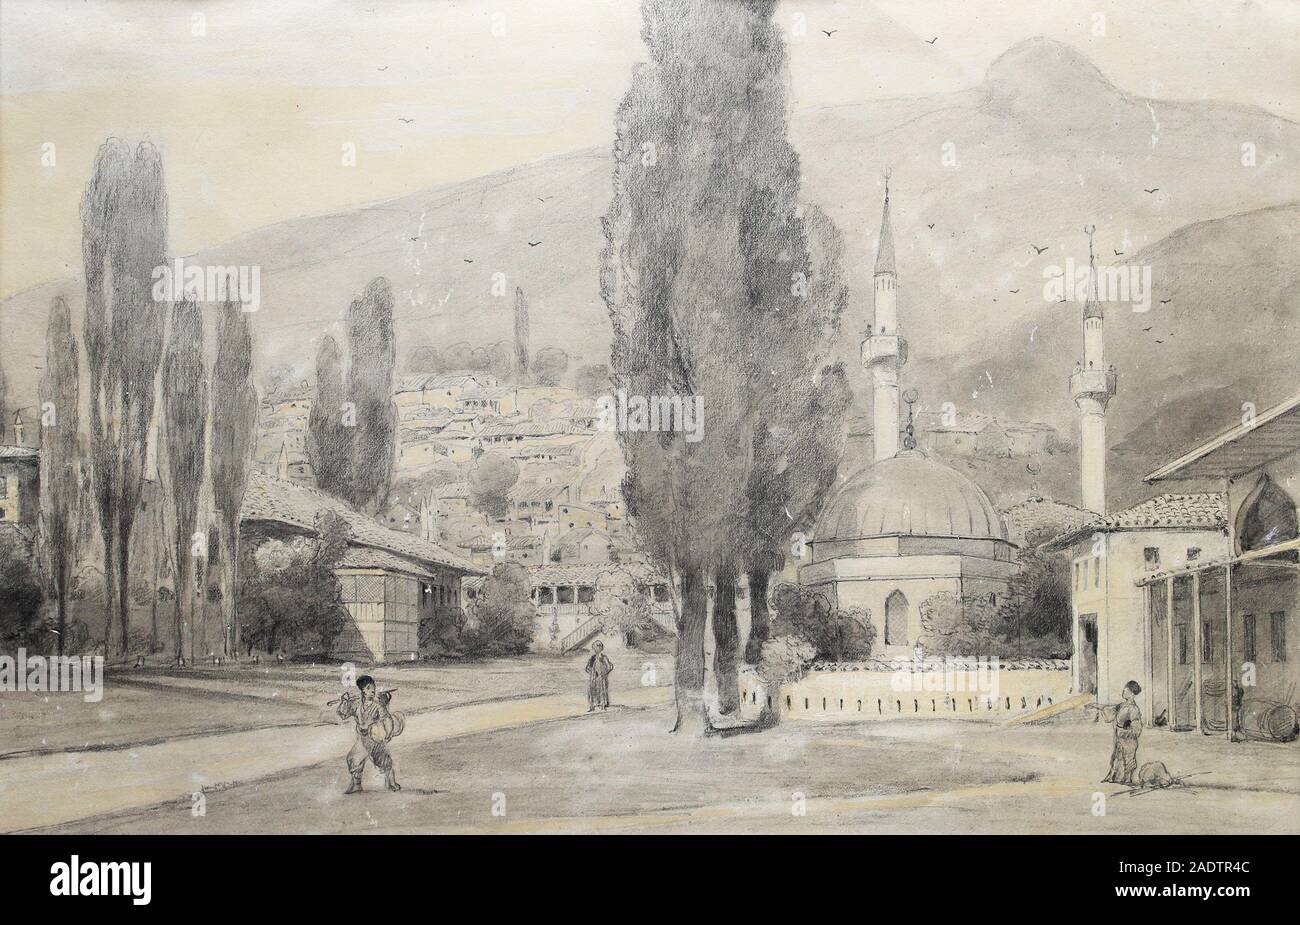 Bakhchisarai Khan Palace. Drawn picture of the 19th century. Stock Photo